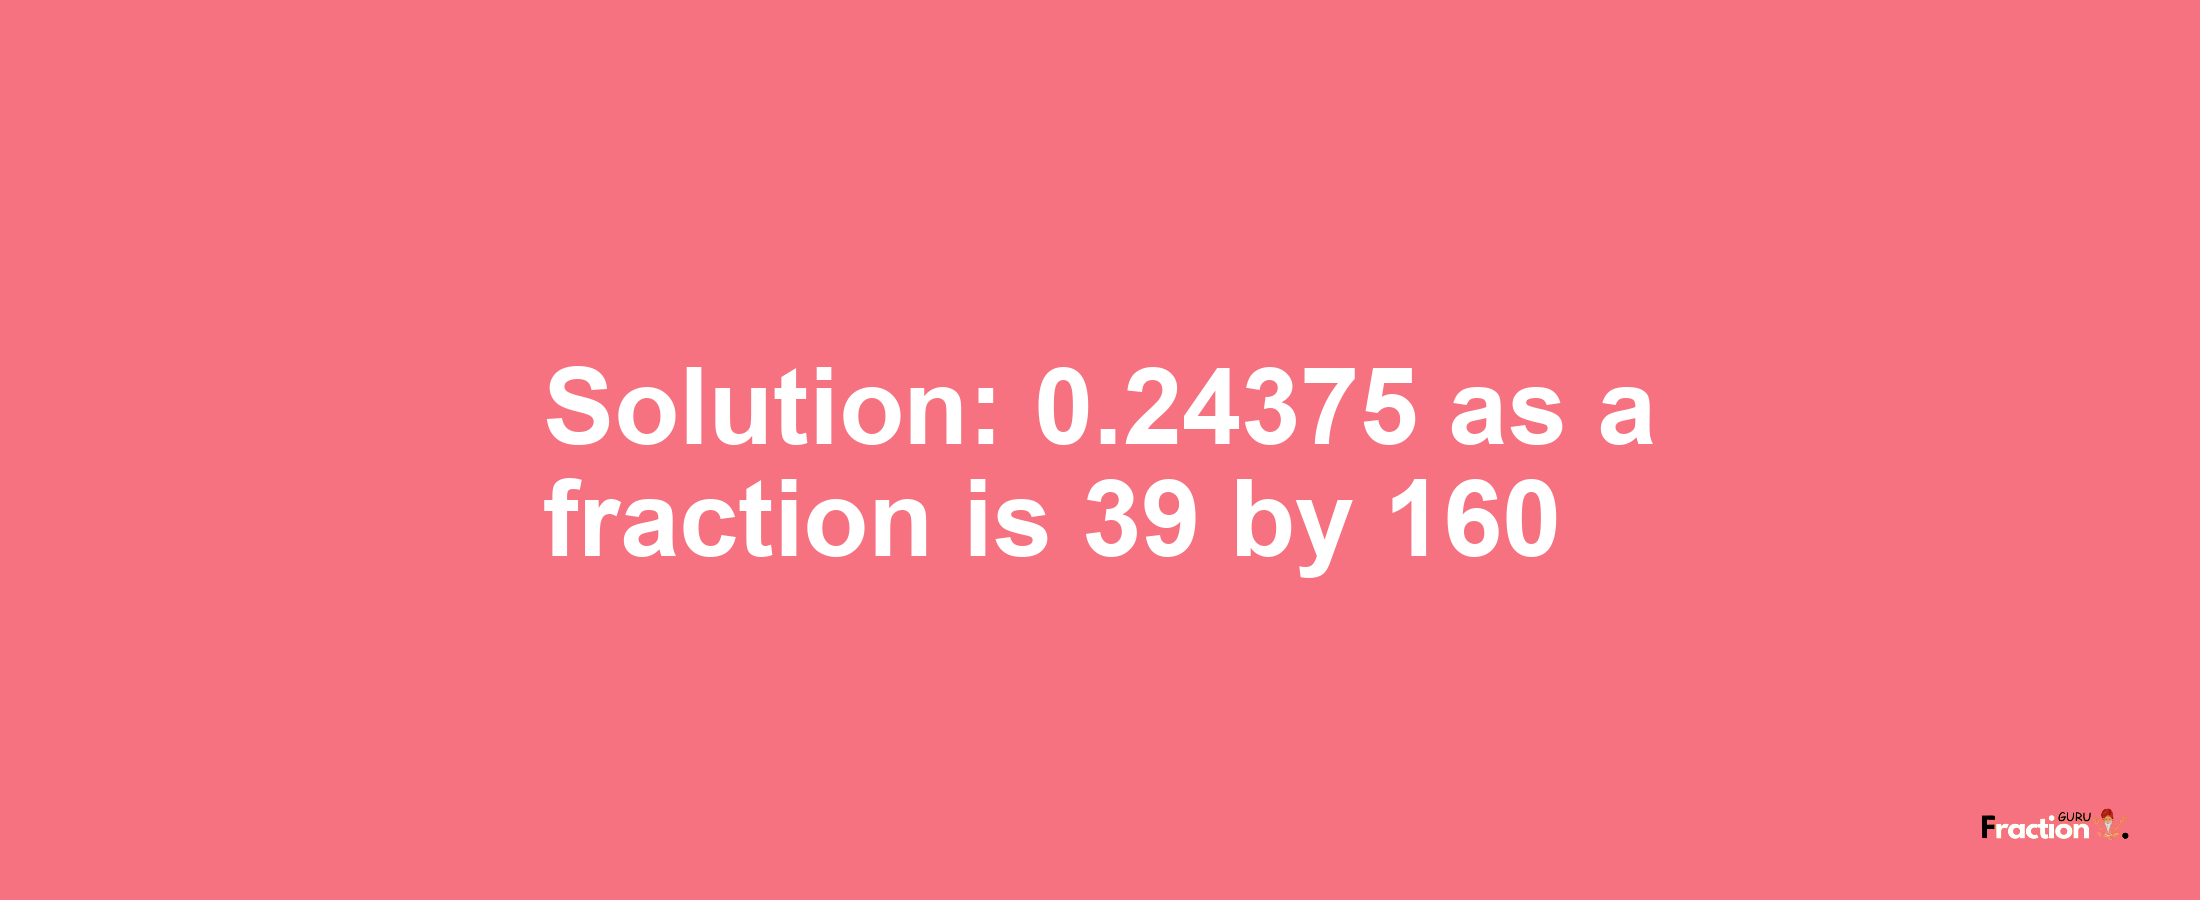 Solution:0.24375 as a fraction is 39/160